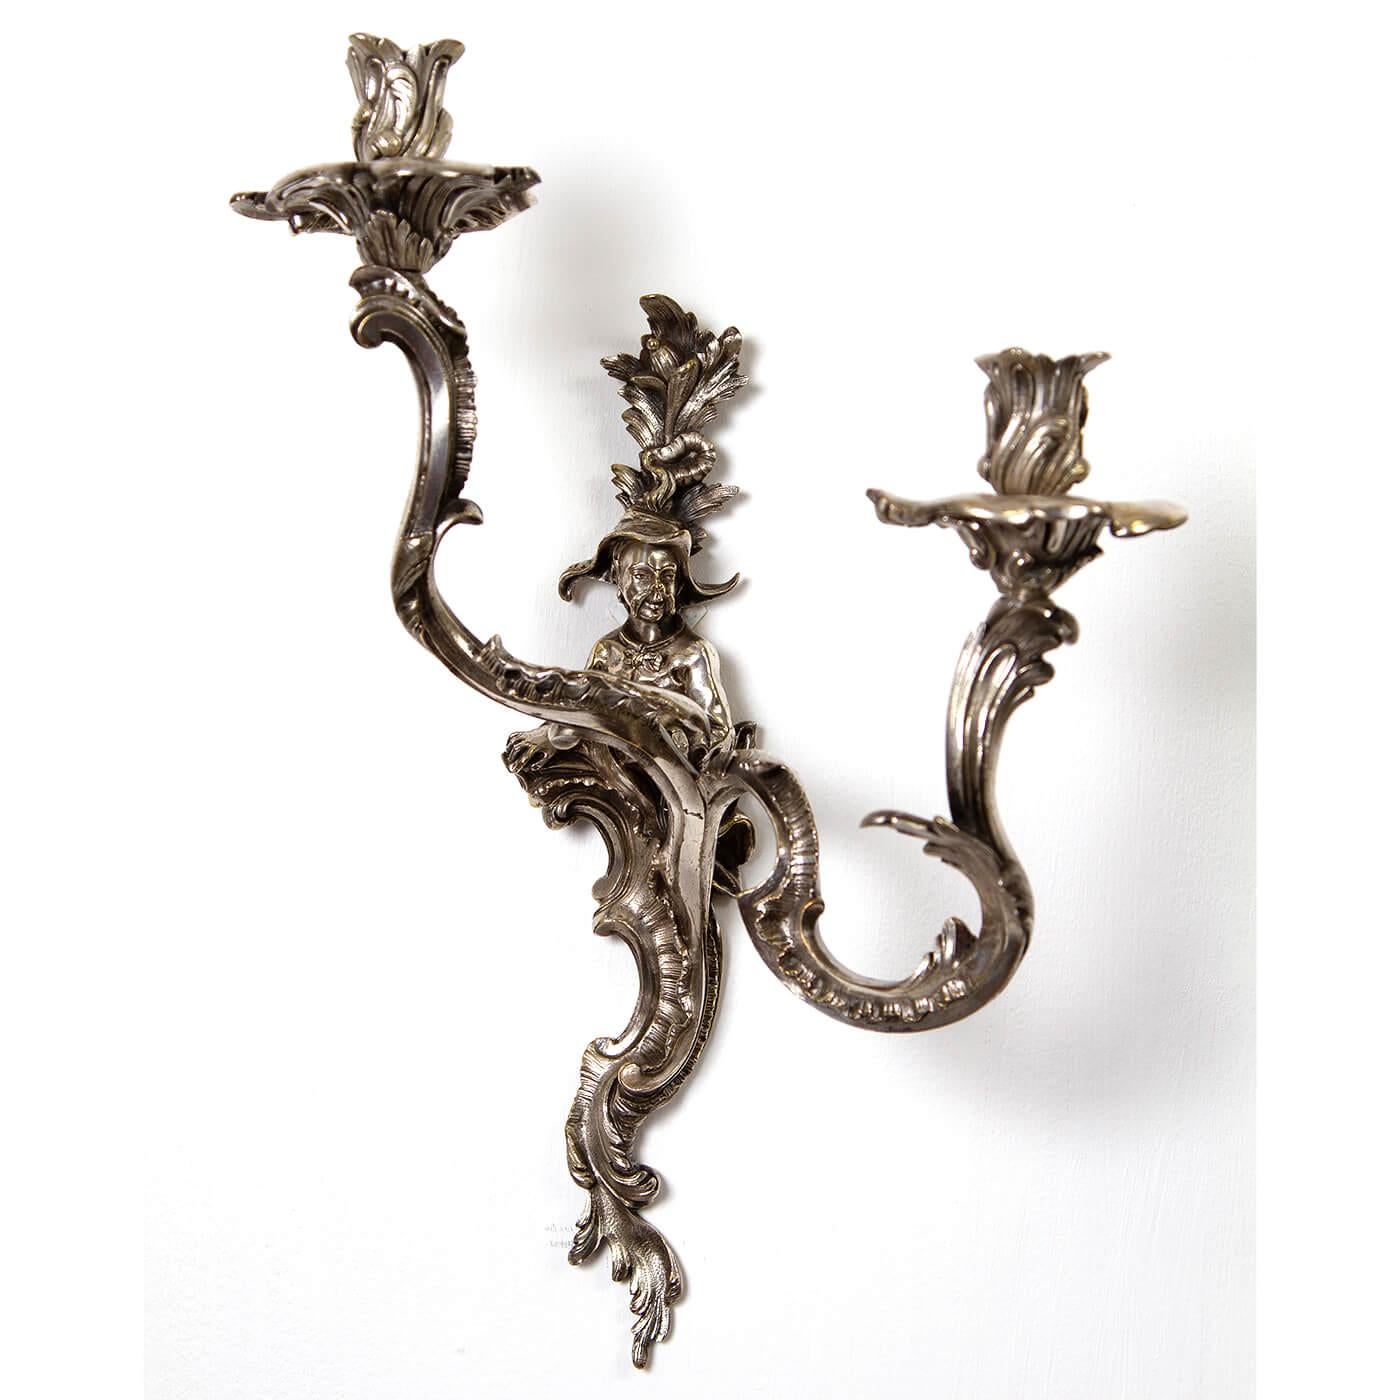 A fine pair of French Louis XV sconces with a finely cast silvered bronze, the Chinsoierie male and female figures with elaborate leaves, C scrolls, and floral motifs. 

France, ca 1890

Dimensions: 11